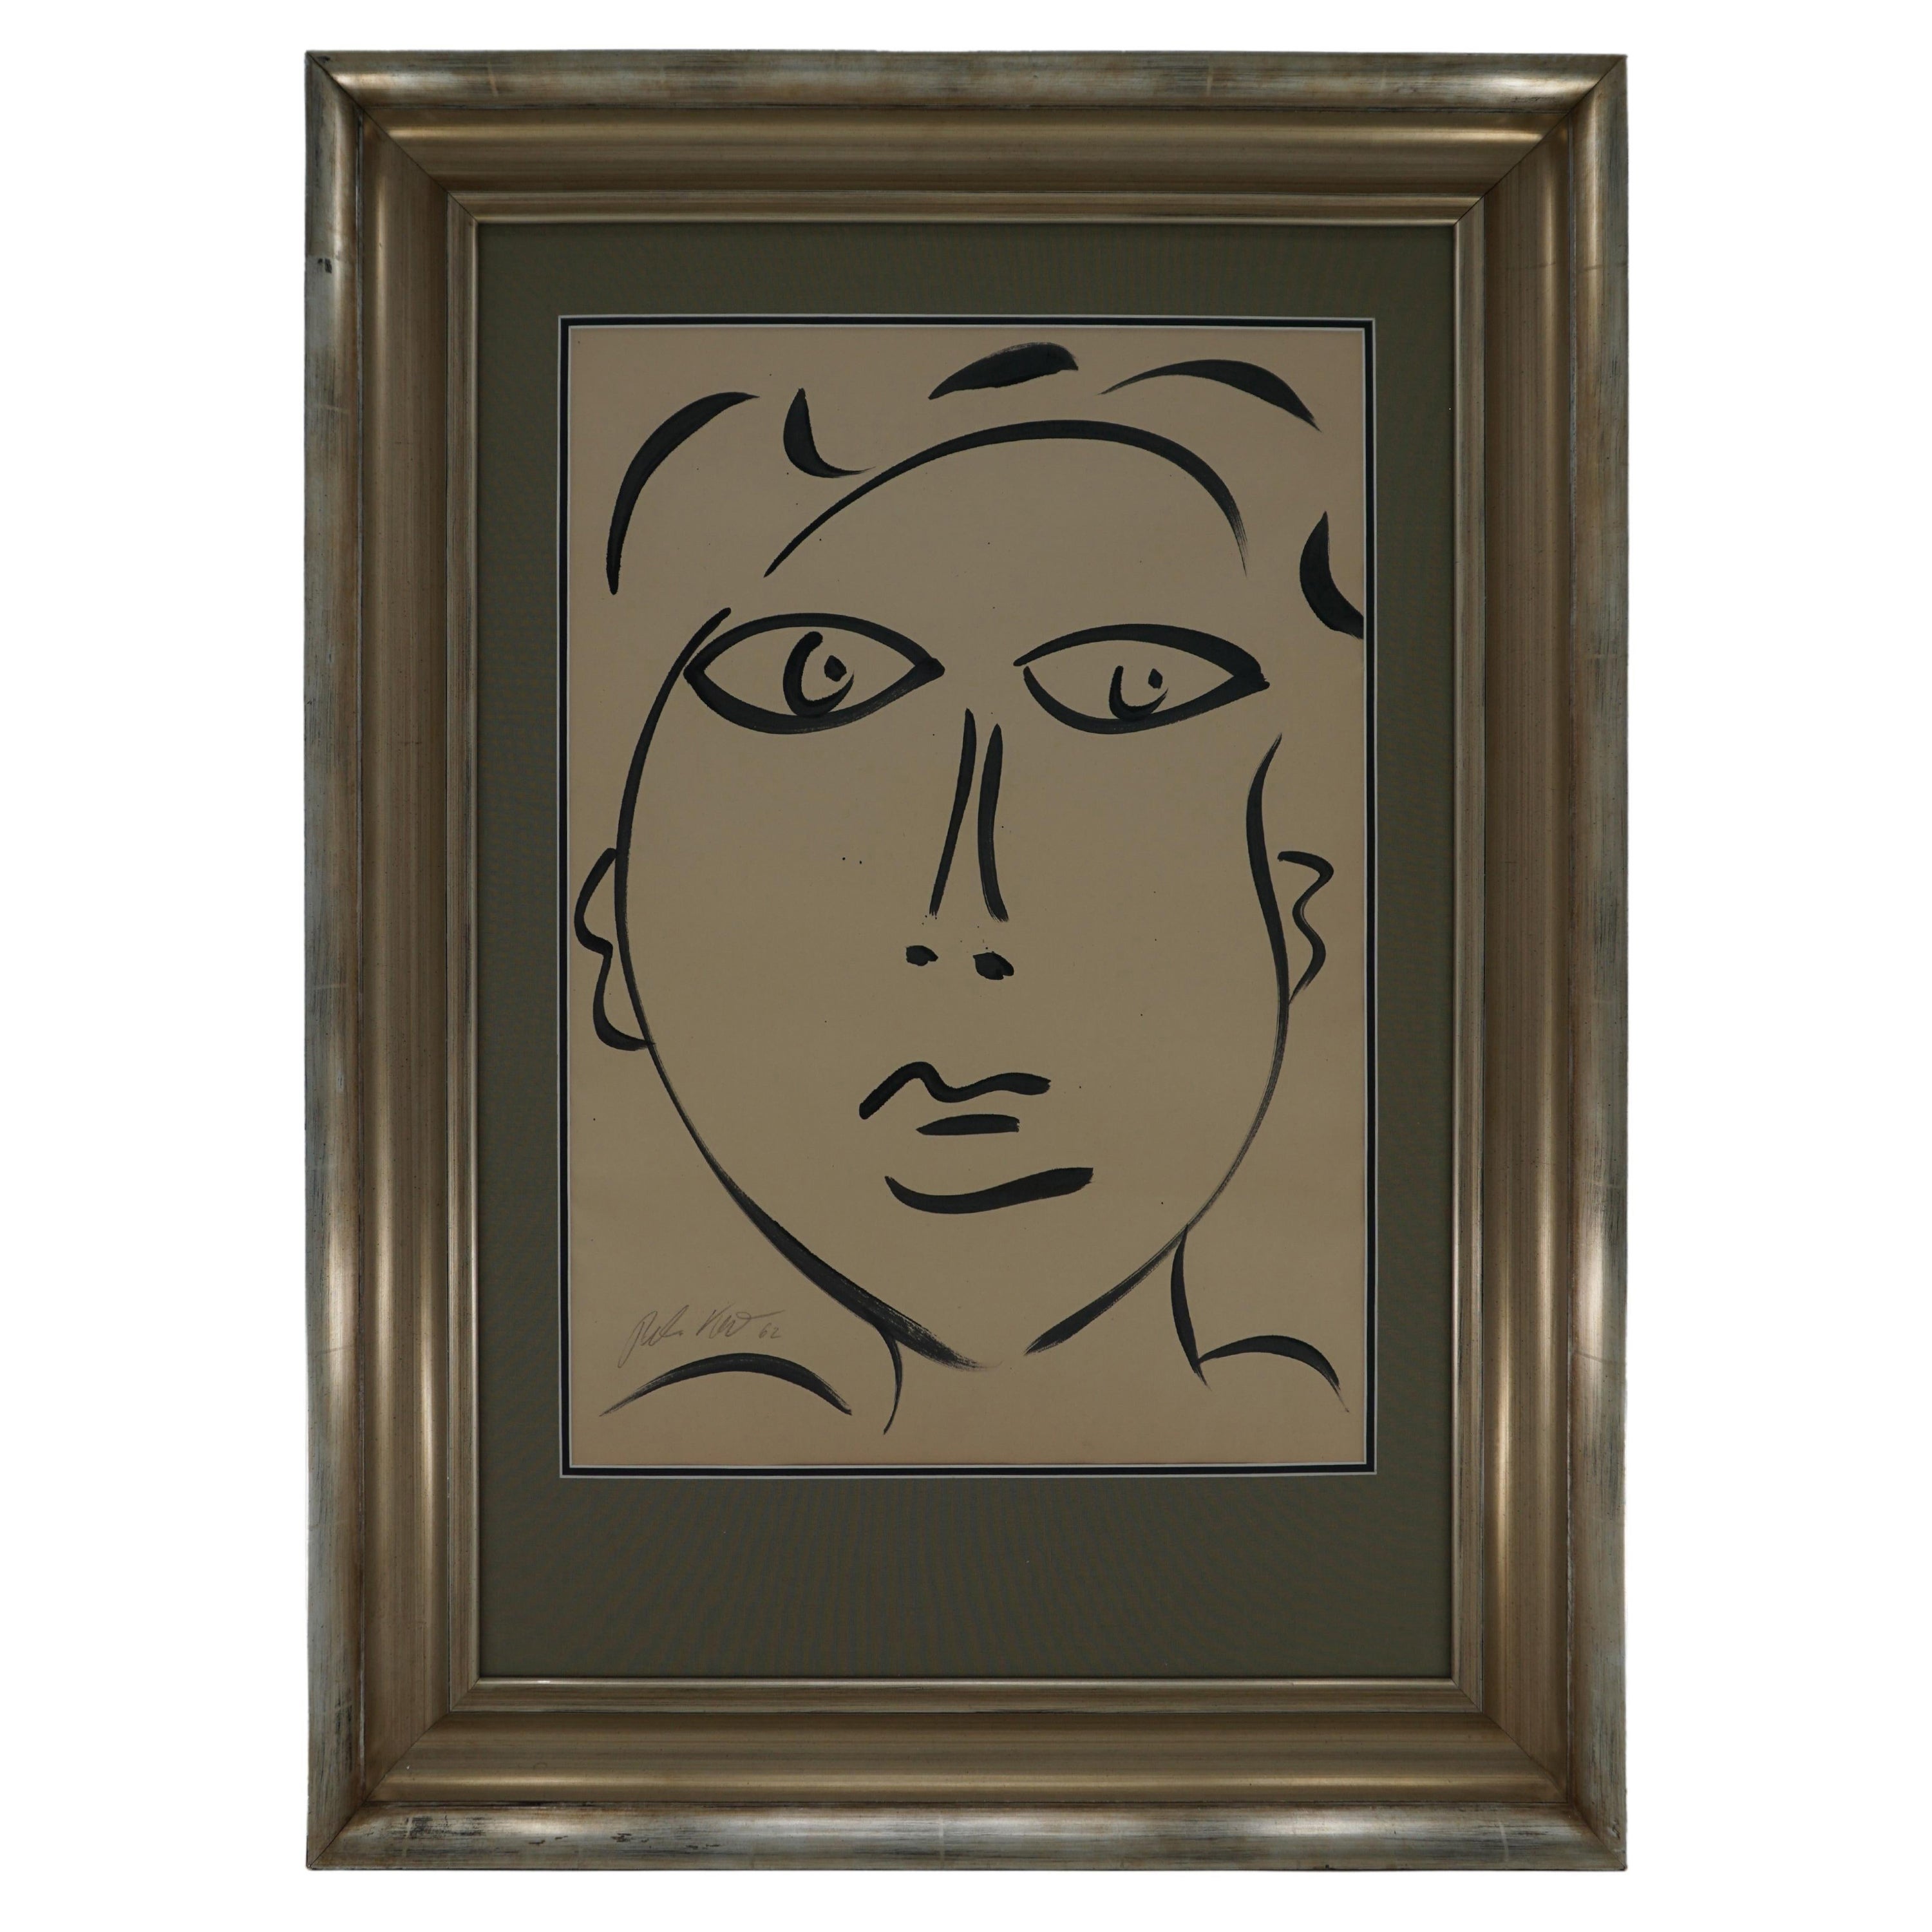 Painting by Peter Keil, C 1962, New Wood Silver Frame with Linen Mat, Modern Art